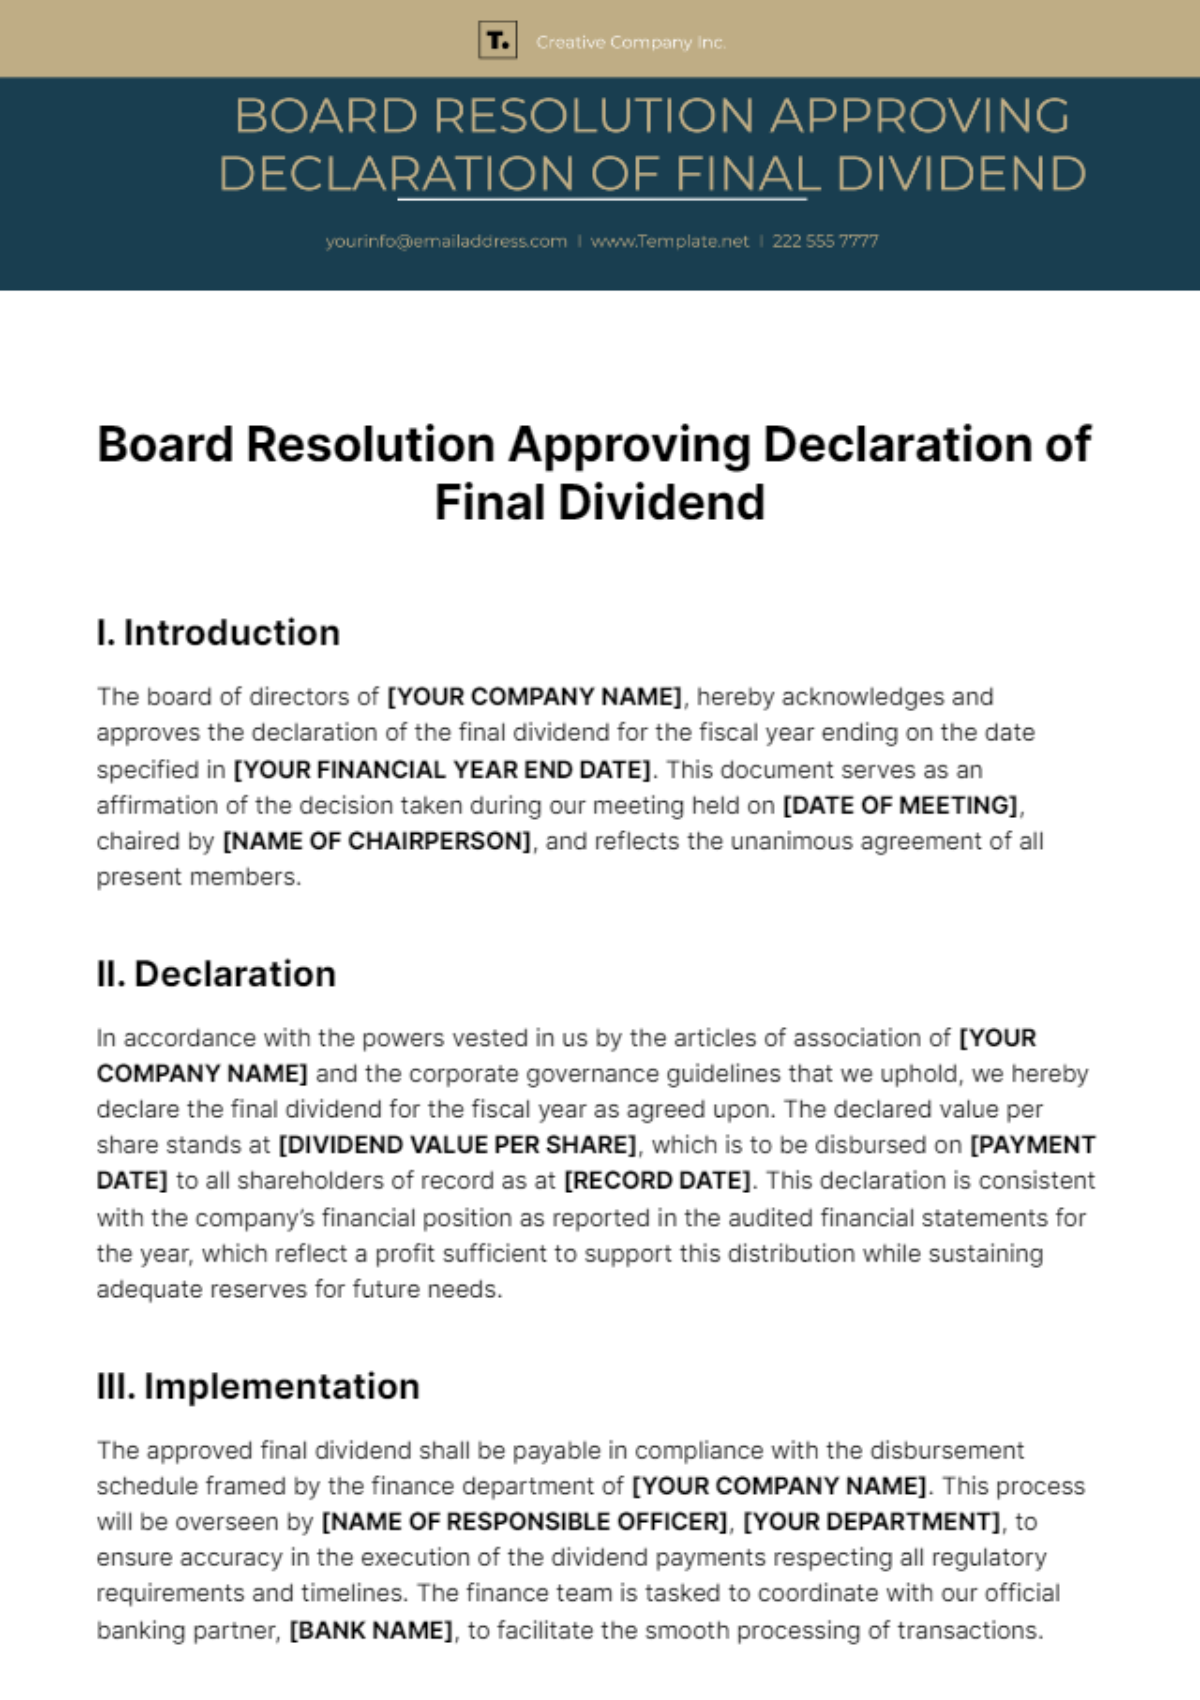 Board Resolution Approving Declaration of Final Dividend Template